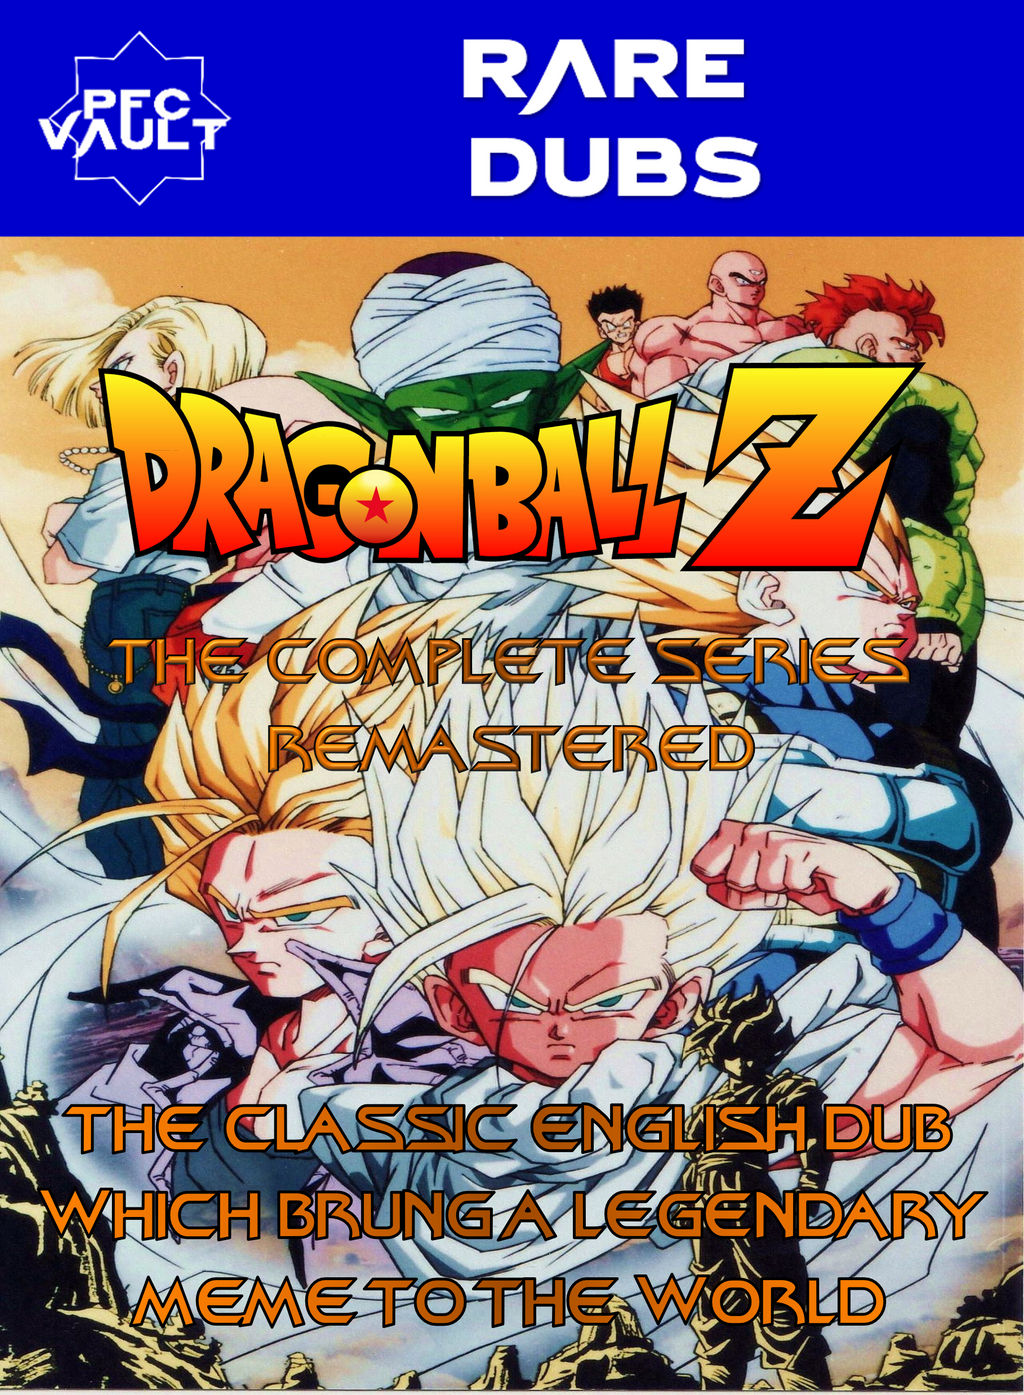 Dragon Ball Z The Complete Series (Ocean Dub) DVD by DTVRocks on